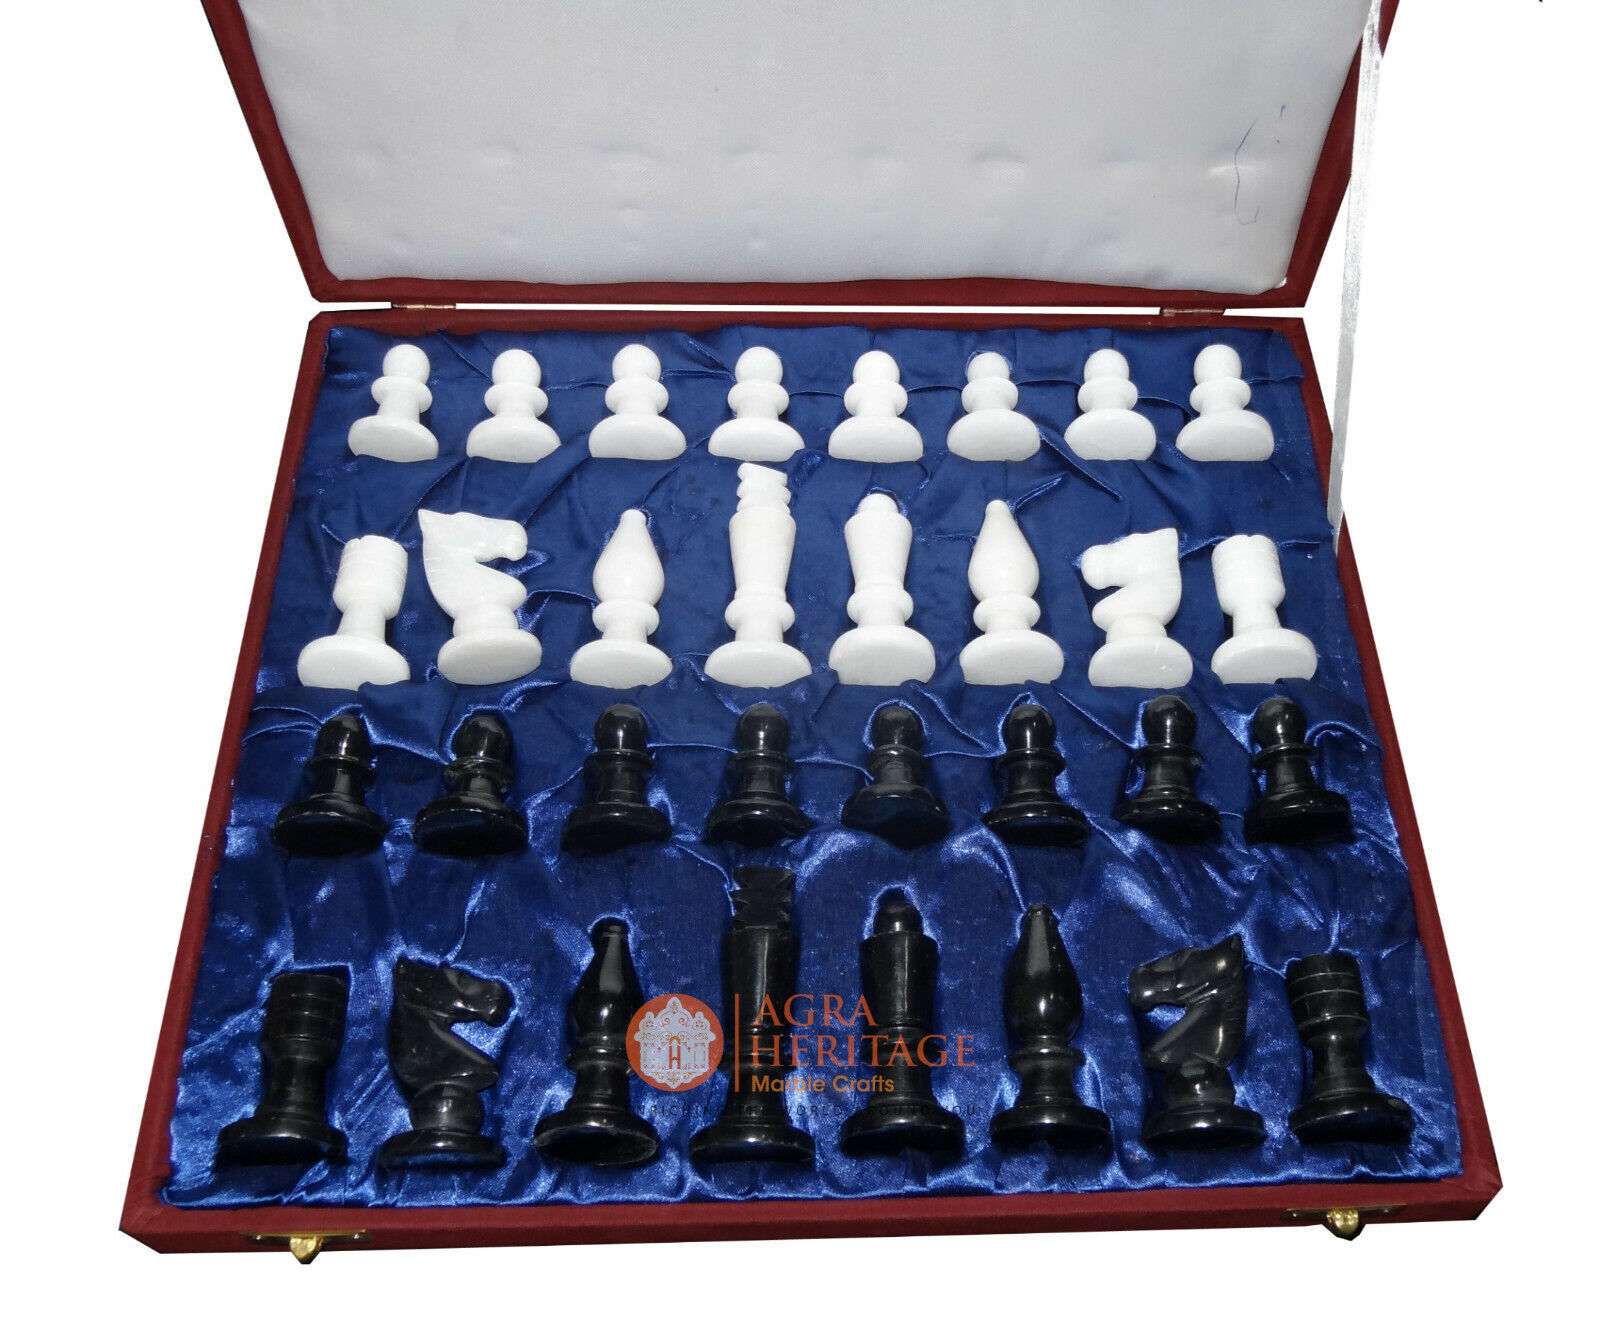 Primary image for King Size 2.5" Marble Chess Pieces With Blue Velvet Box Handmade Chess Lovers